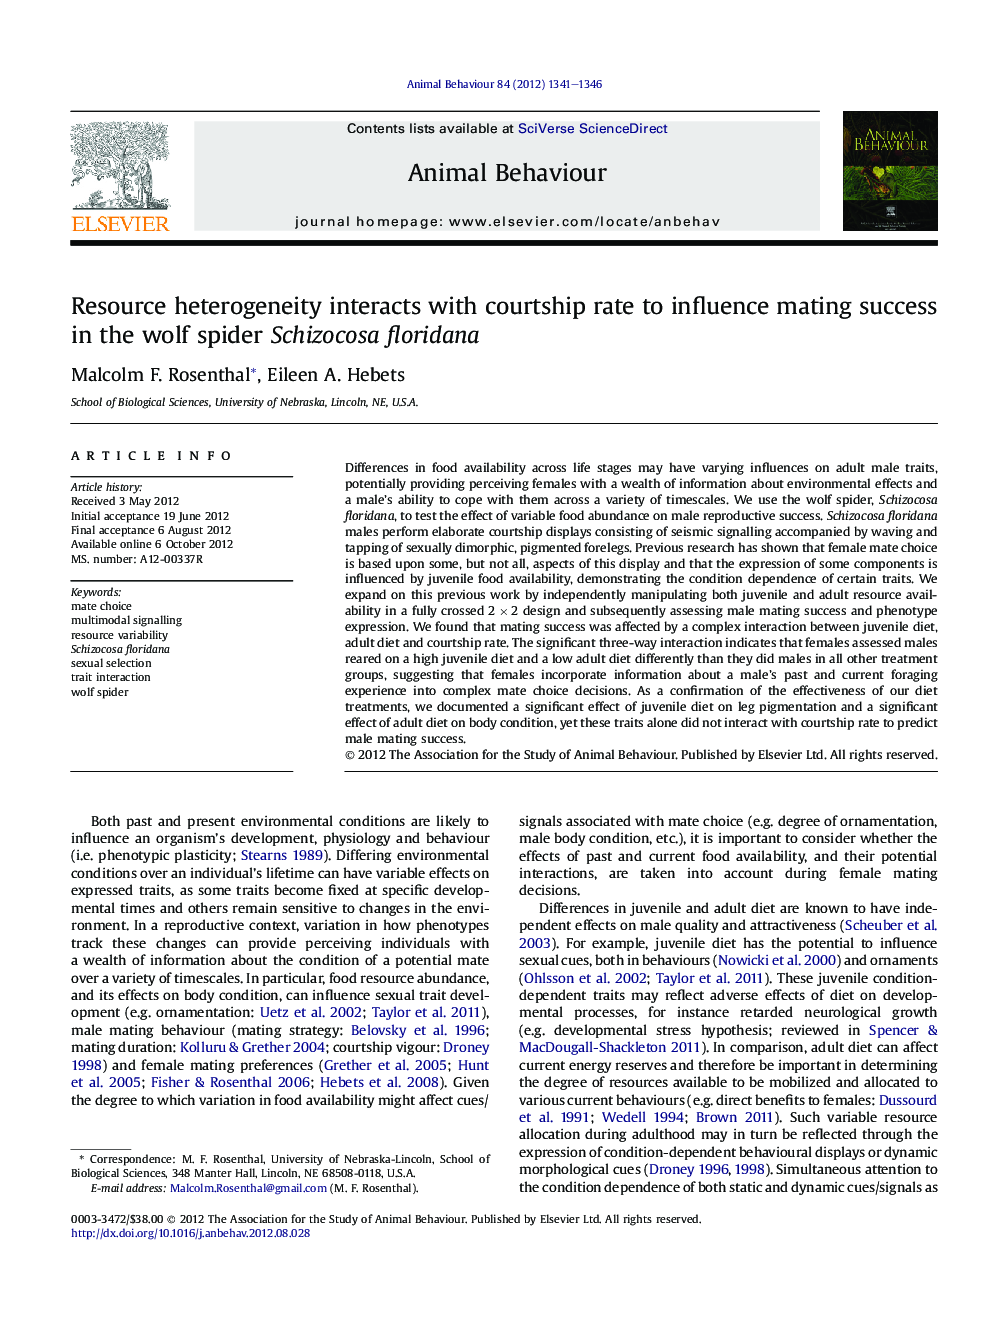 Resource heterogeneity interacts with courtship rate to influence mating success in the wolf spider Schizocosa floridana